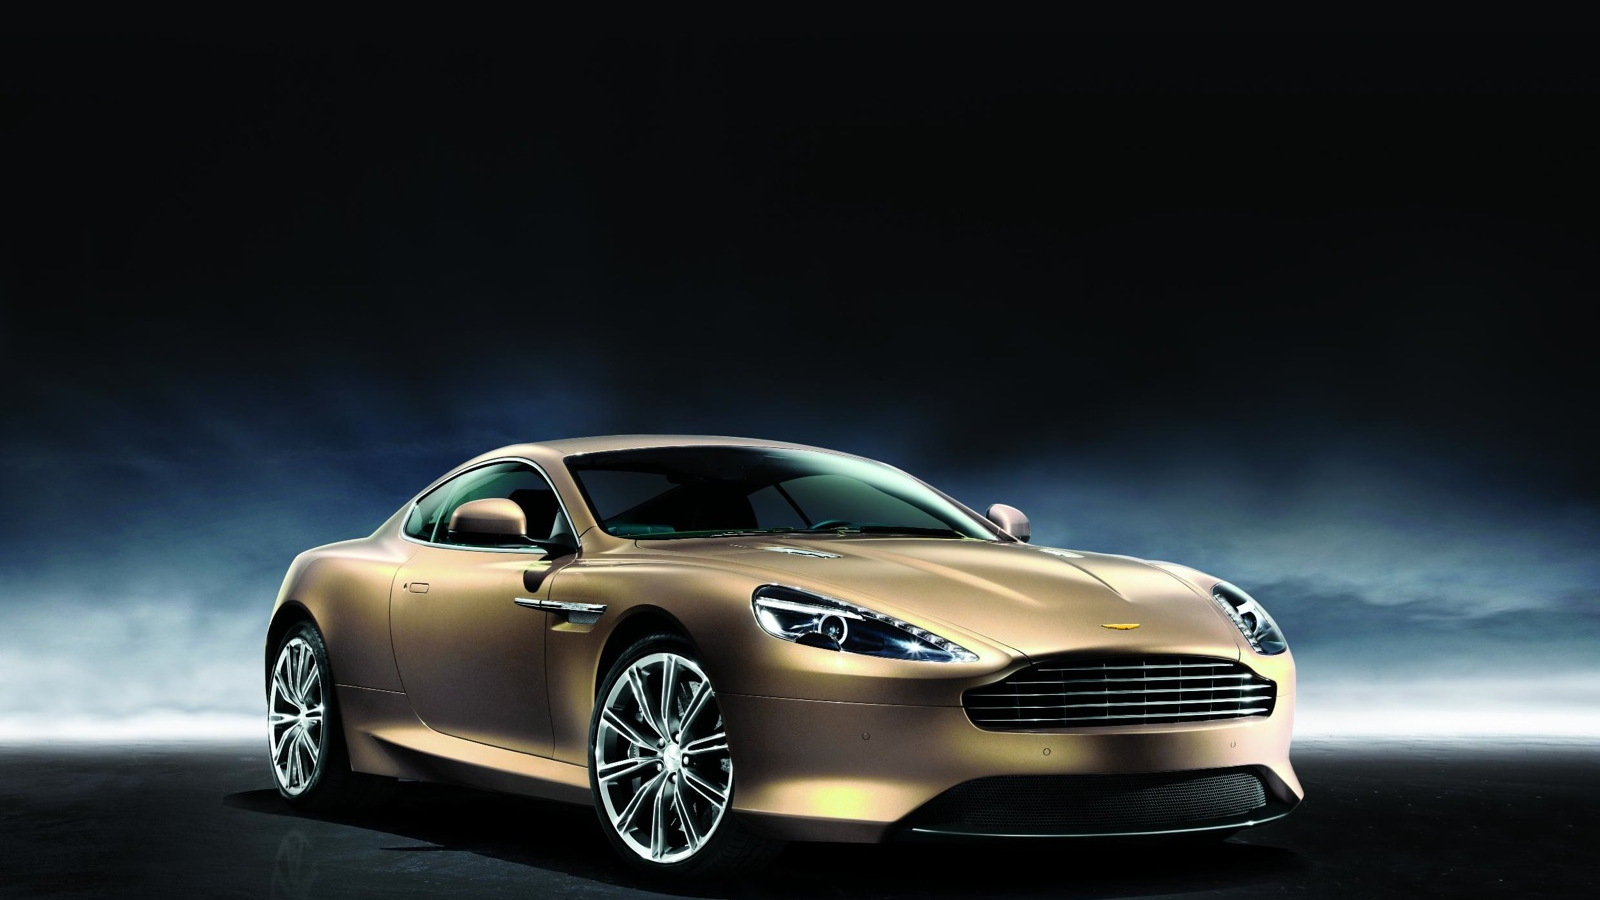 Aston Martin's 'Dragon 88' Special Editions for the Chinese market.